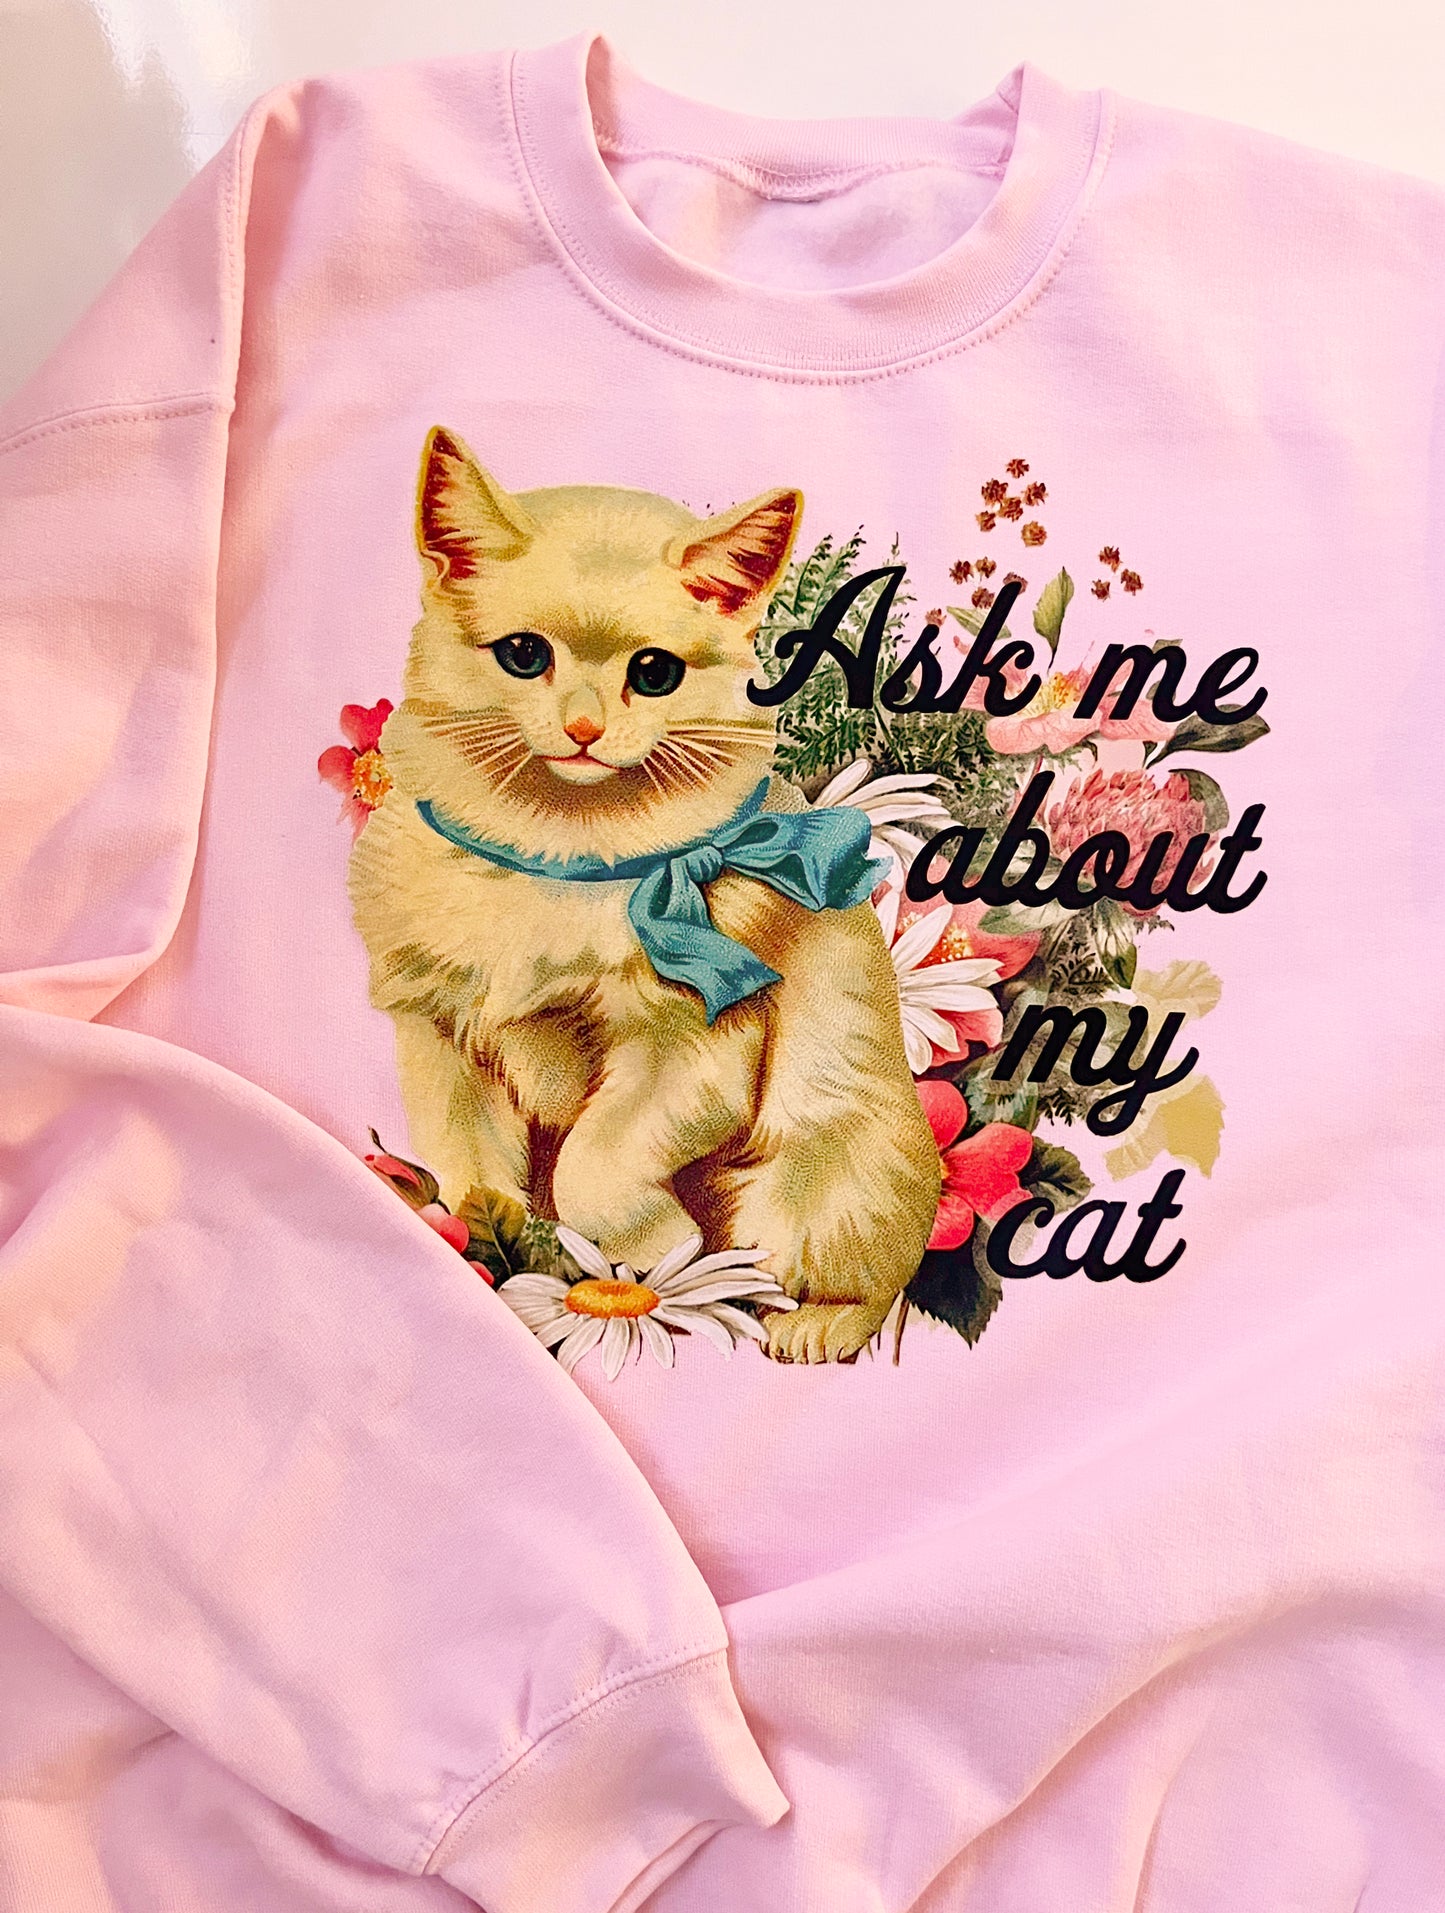 Ask Me About My Cat Pink Sweatshirt